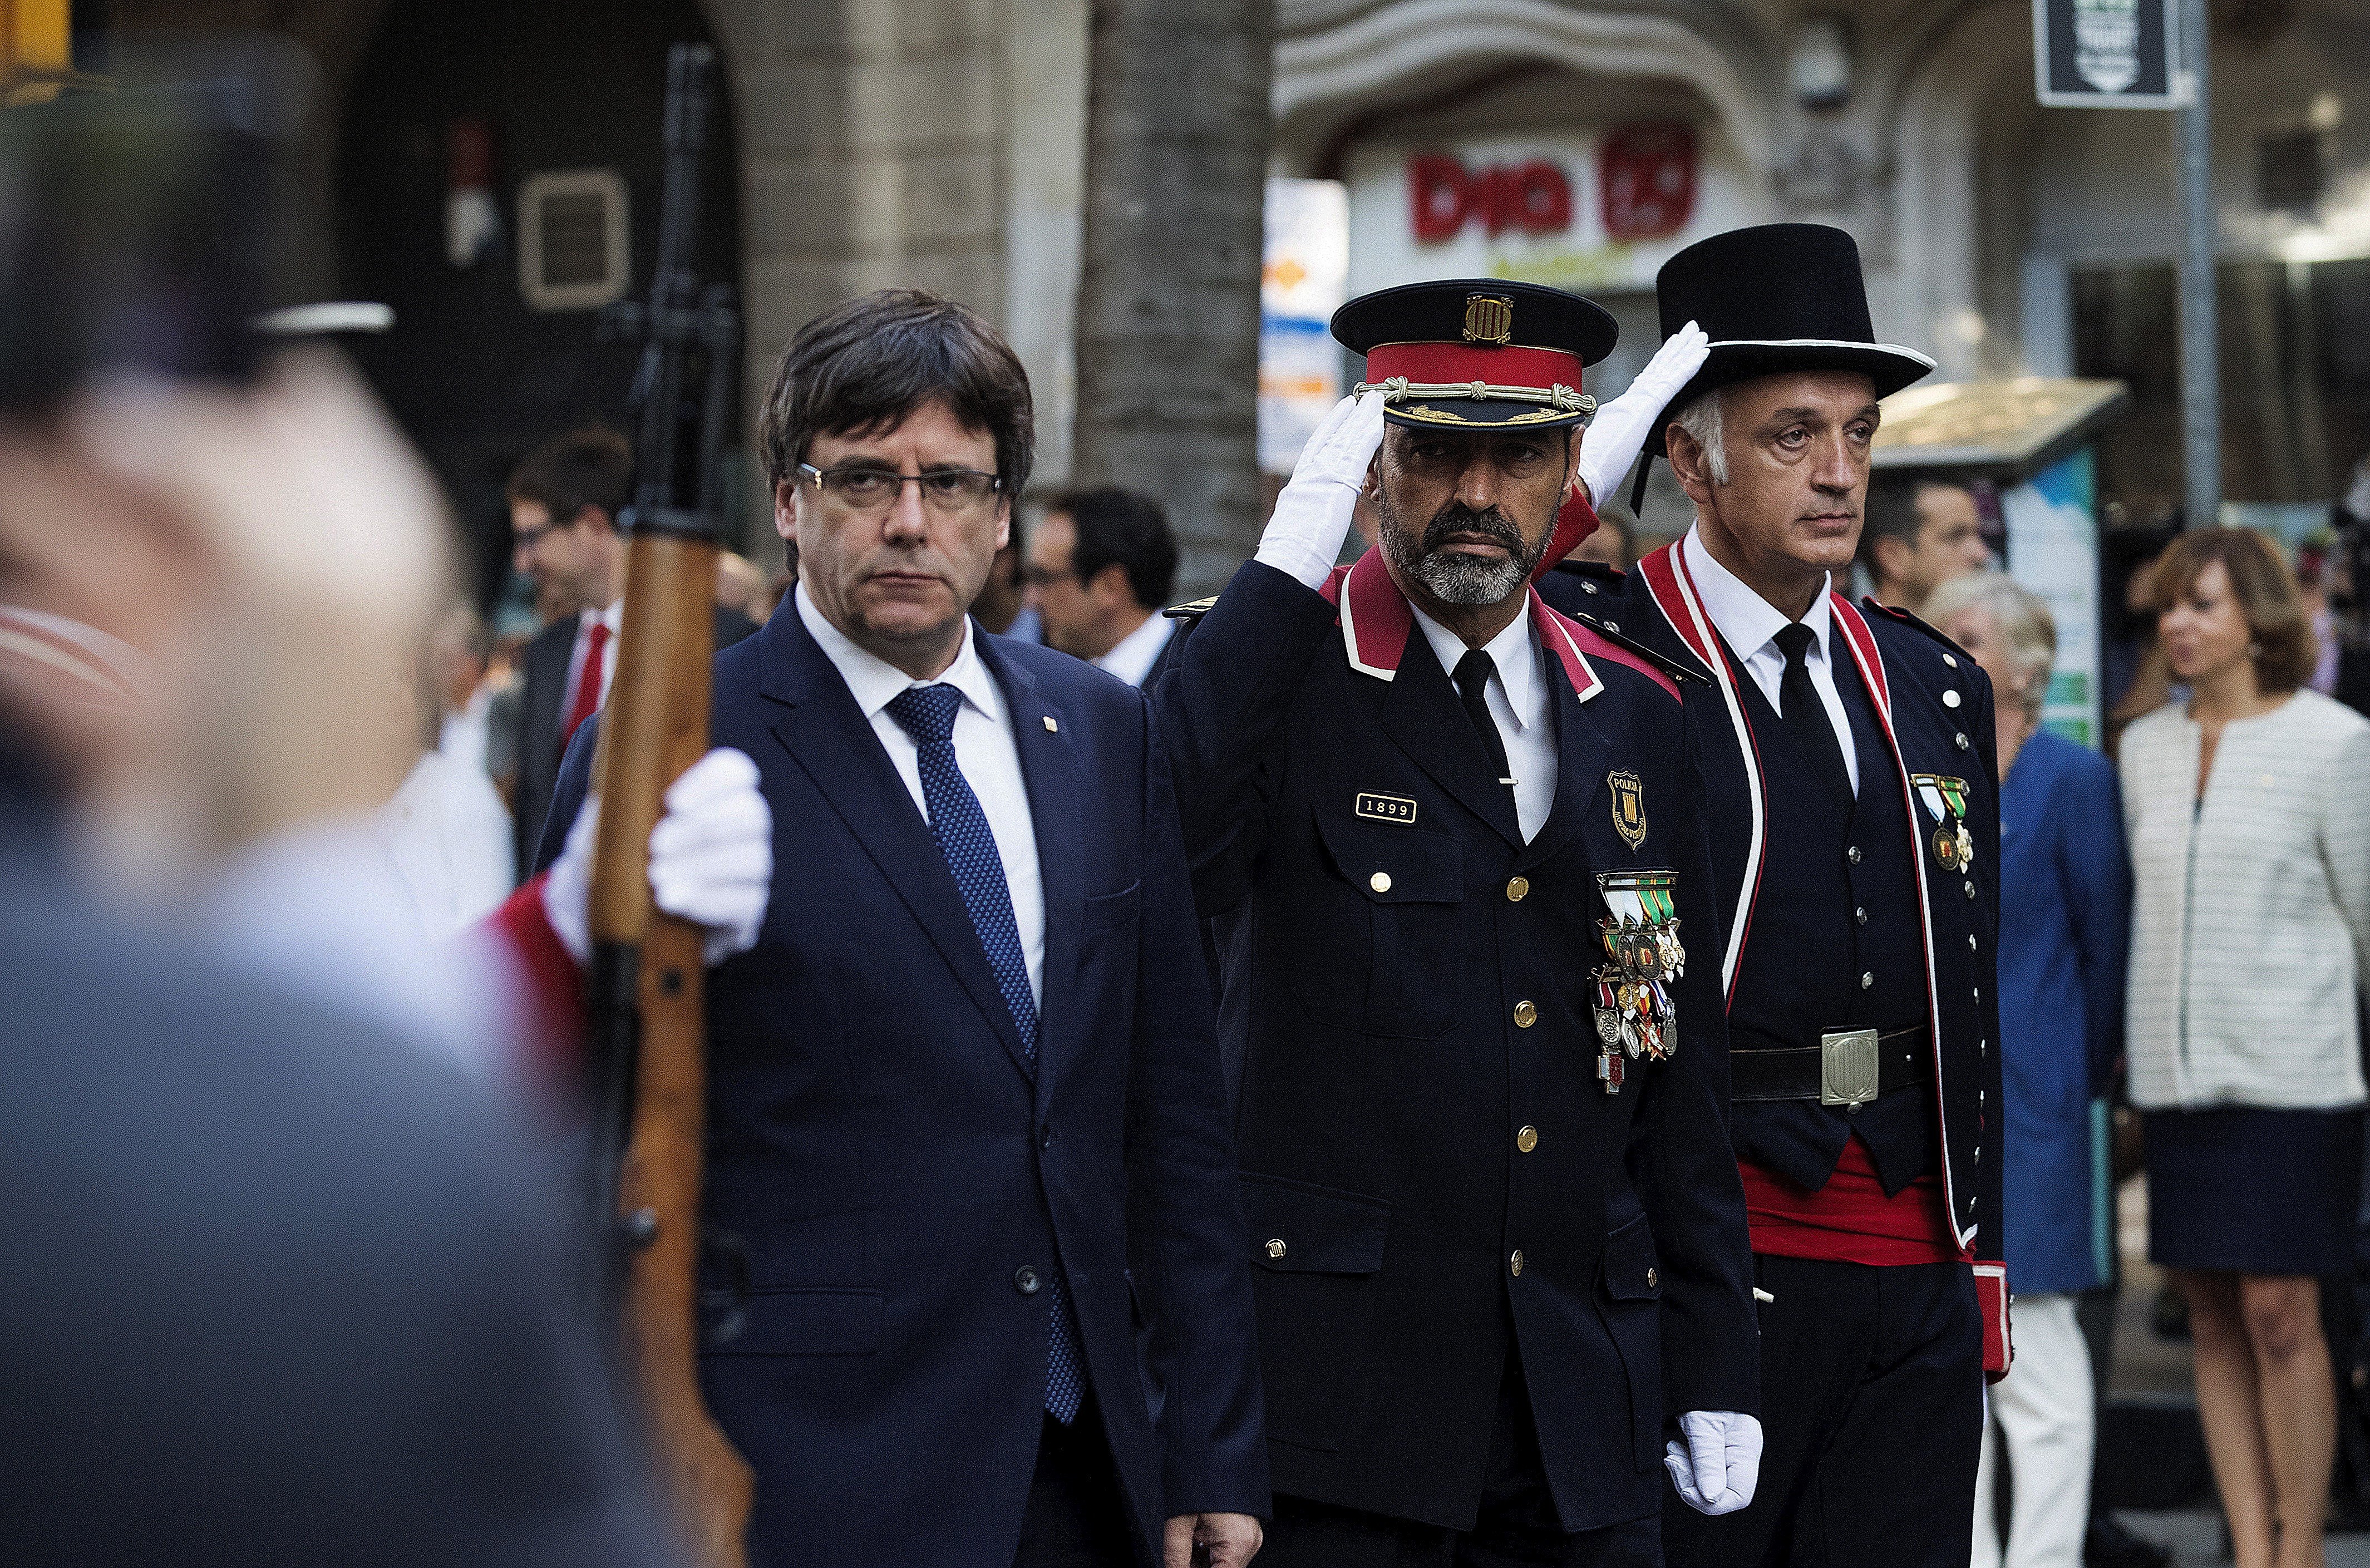 Catalan police chief denies any "malicious collusion" with Puigdemont, Forn